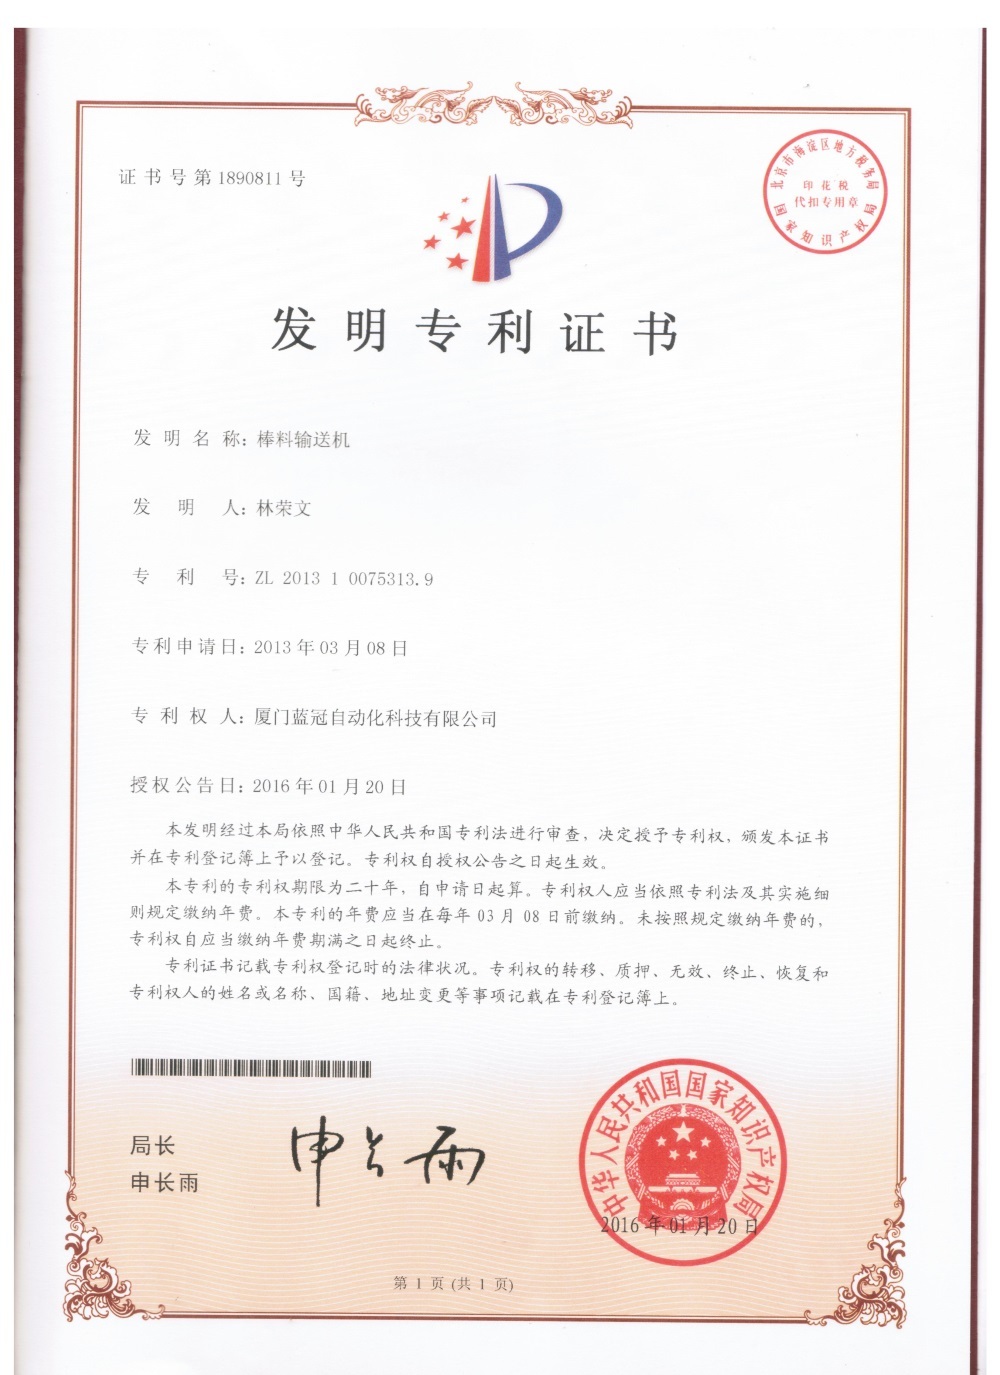 Patent Certificate for Invention of Bar Conveyor